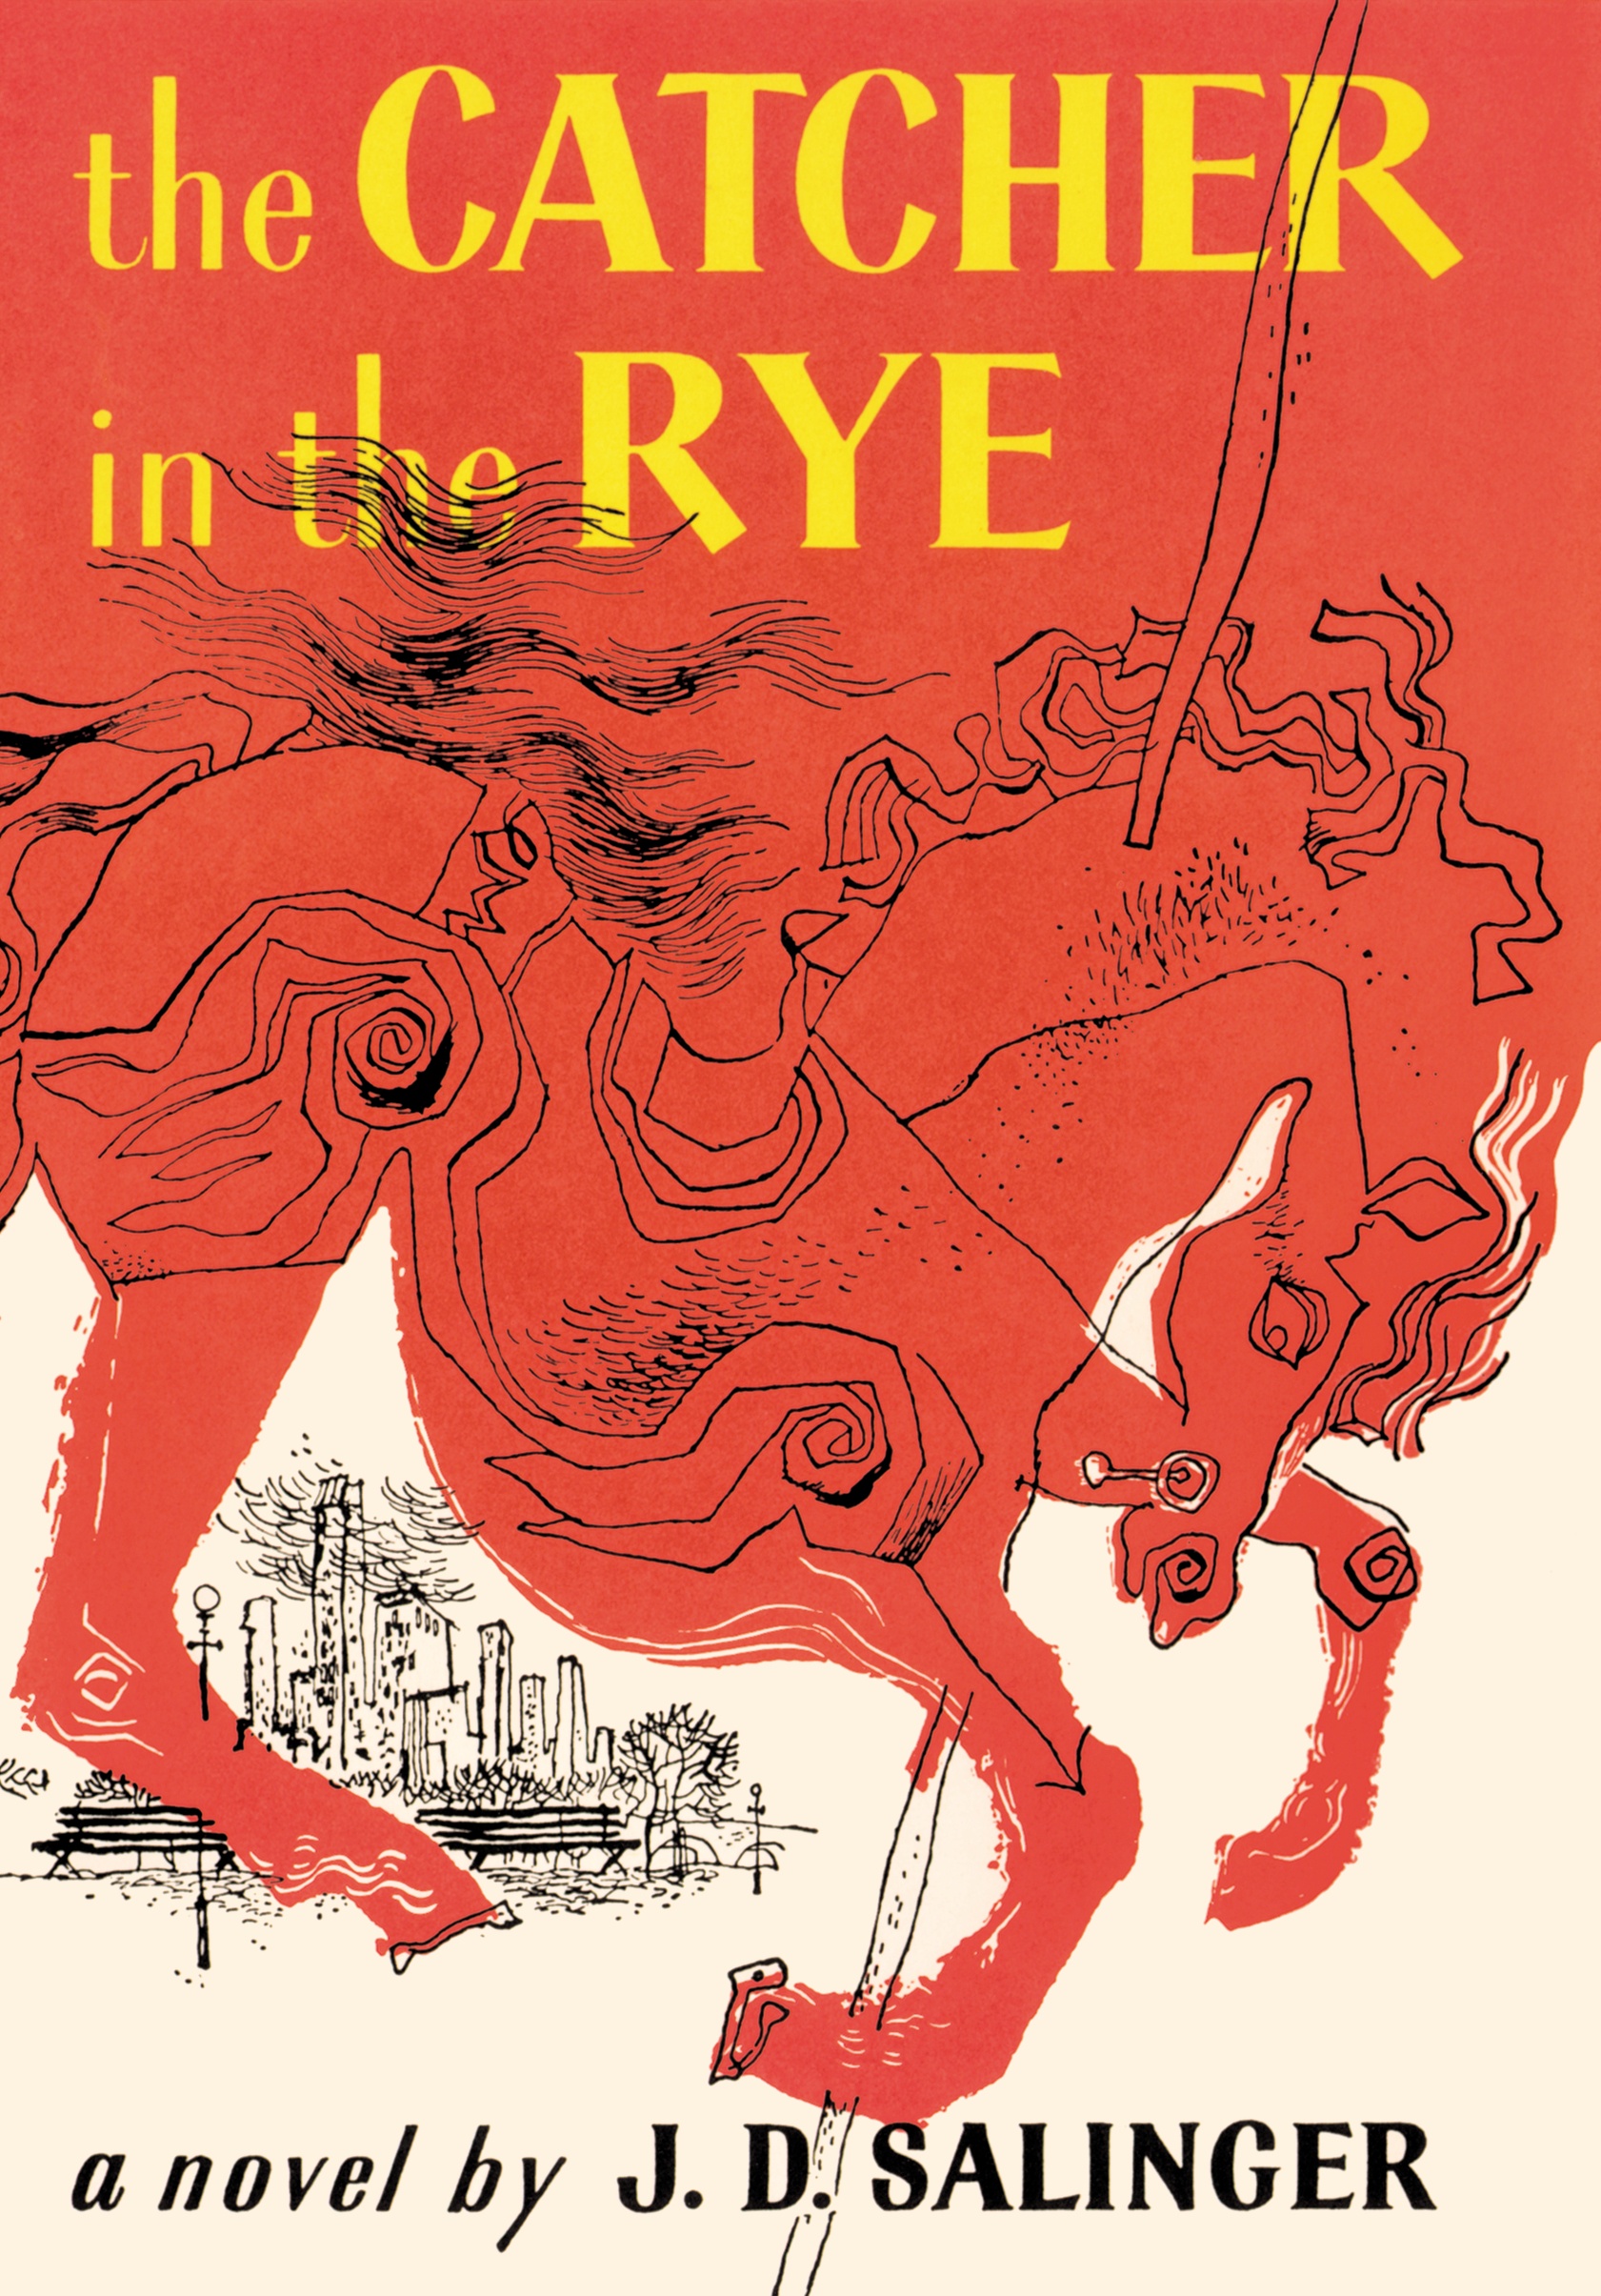 The Catcher in the Rye, by J.D. Salinger - best book to read